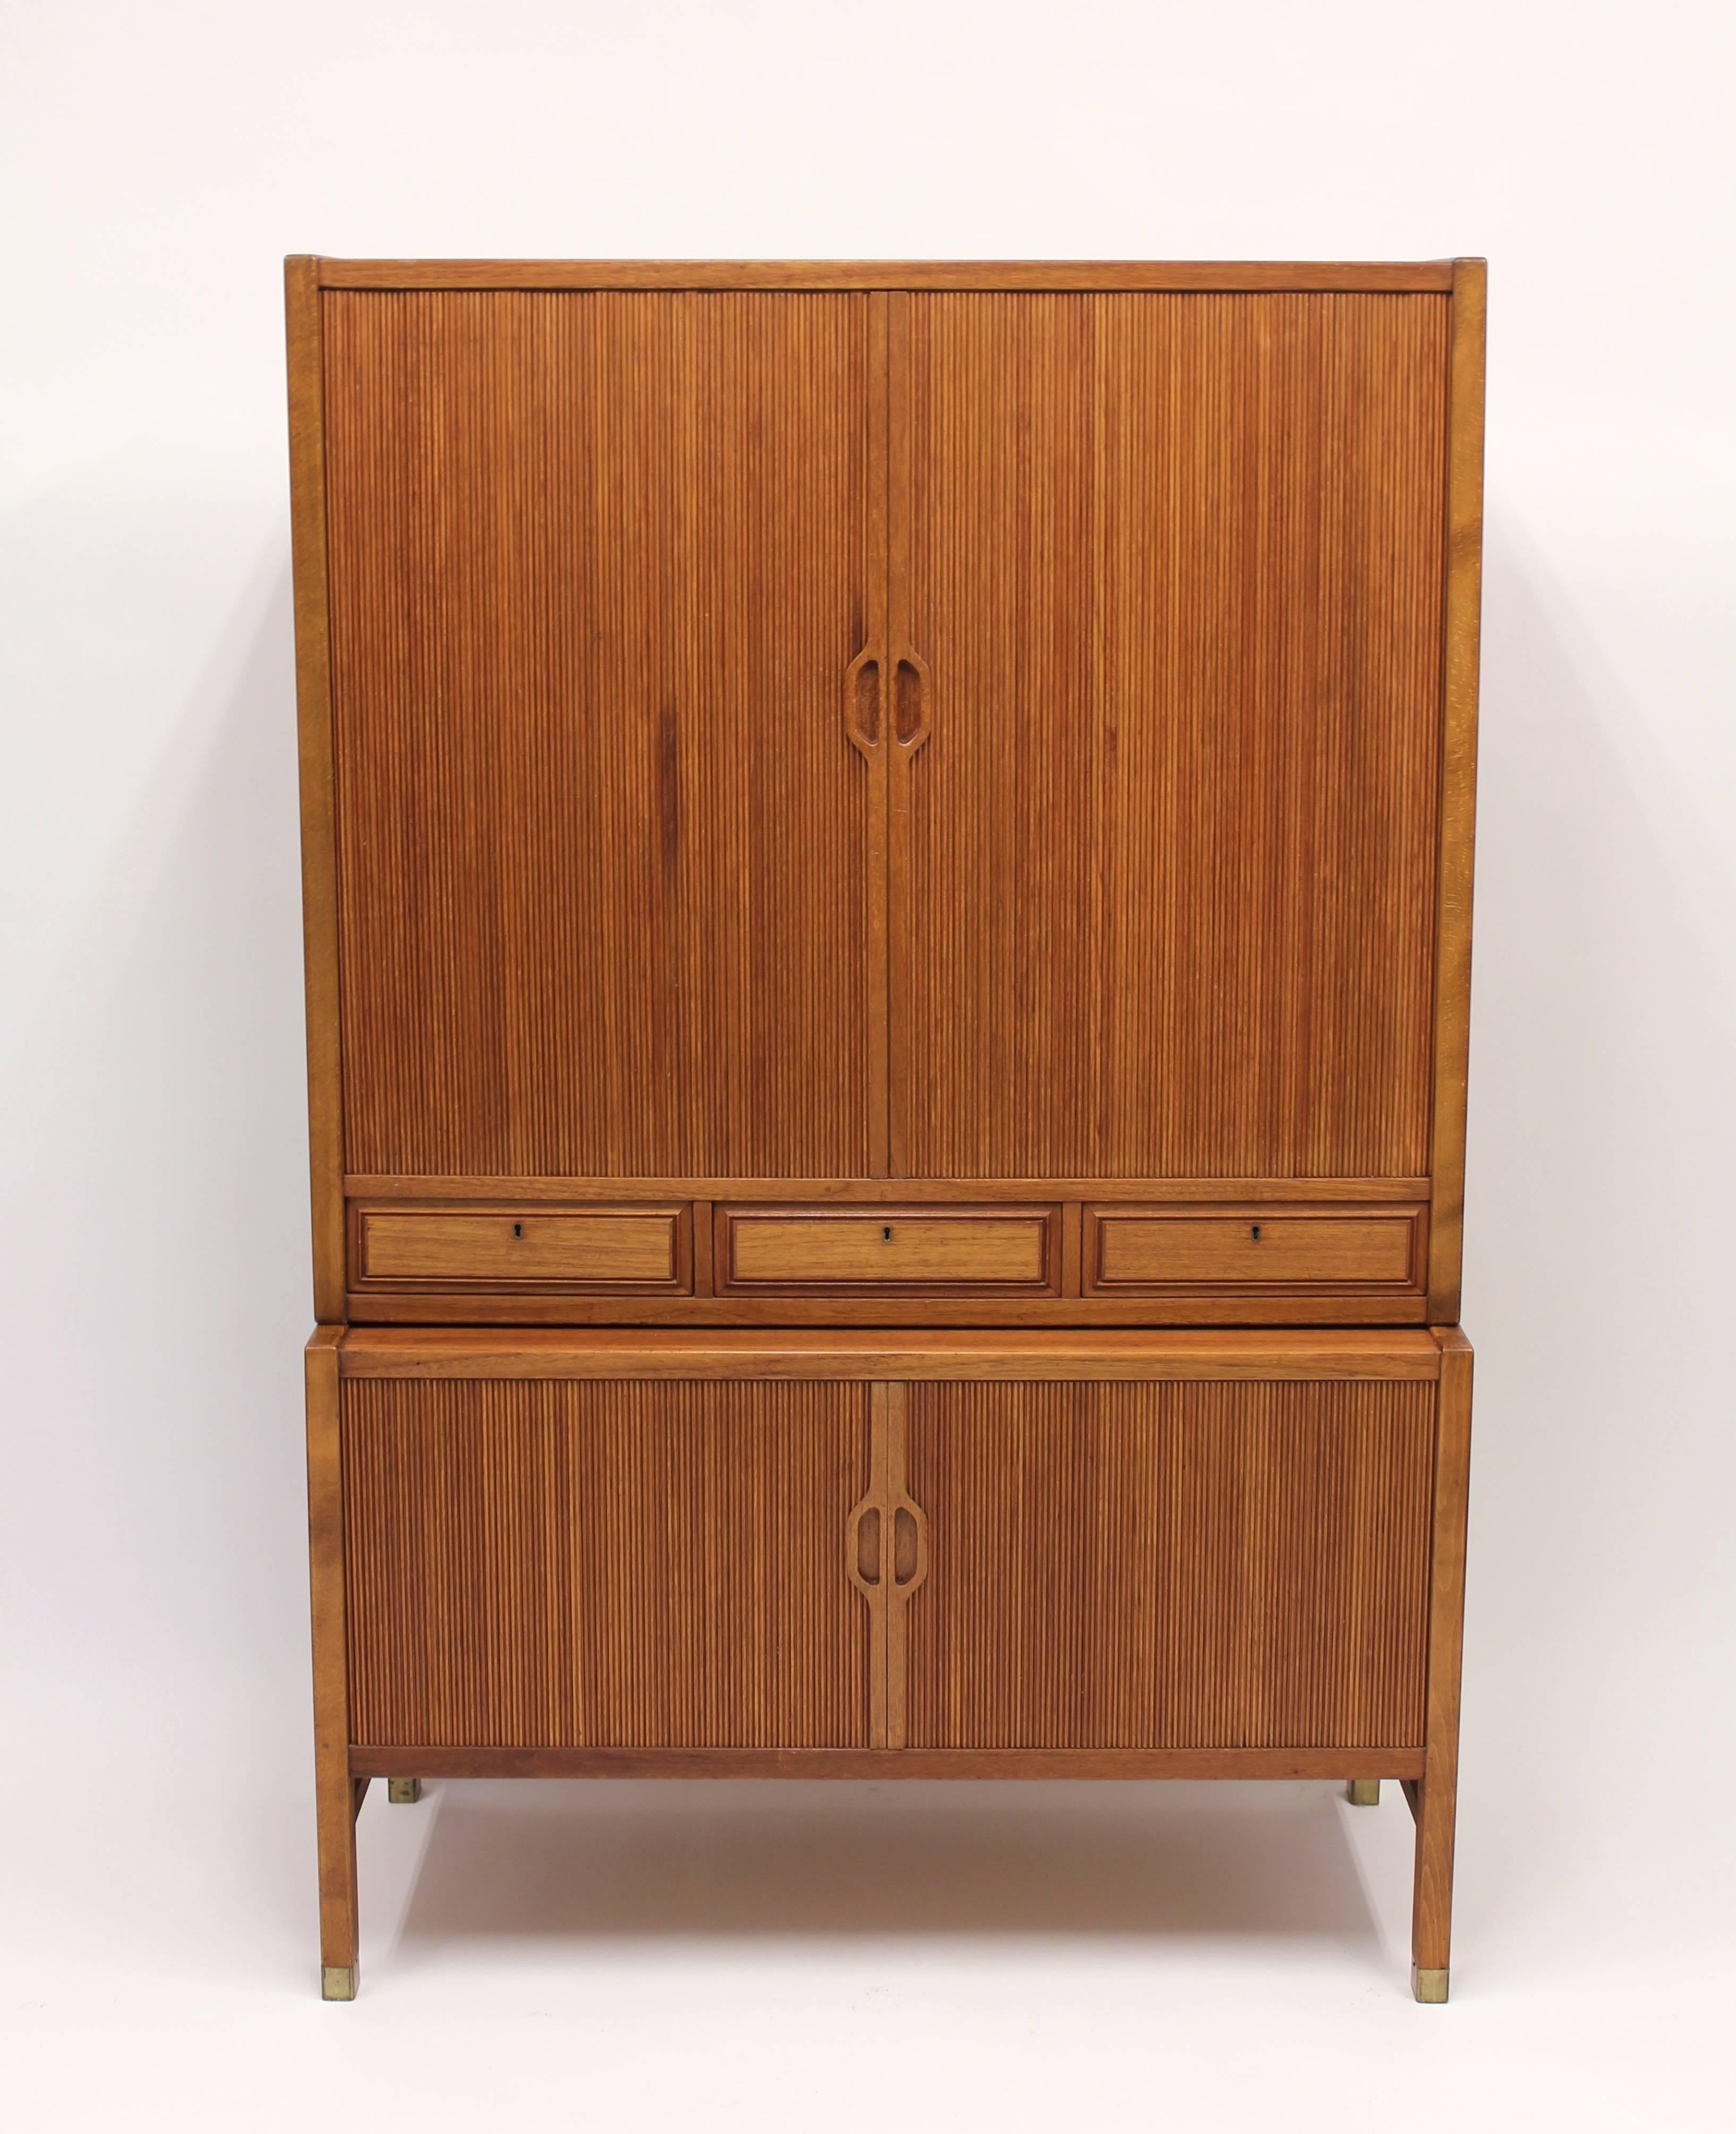 Swedish 1950s teak cabinet on brass feet with jalousie doors on both the top and bottom sections designed by Carl-Axel Acking for Bodafors. One of the inside drawers is stamped with the makers mark. It is in very good vintage condition.